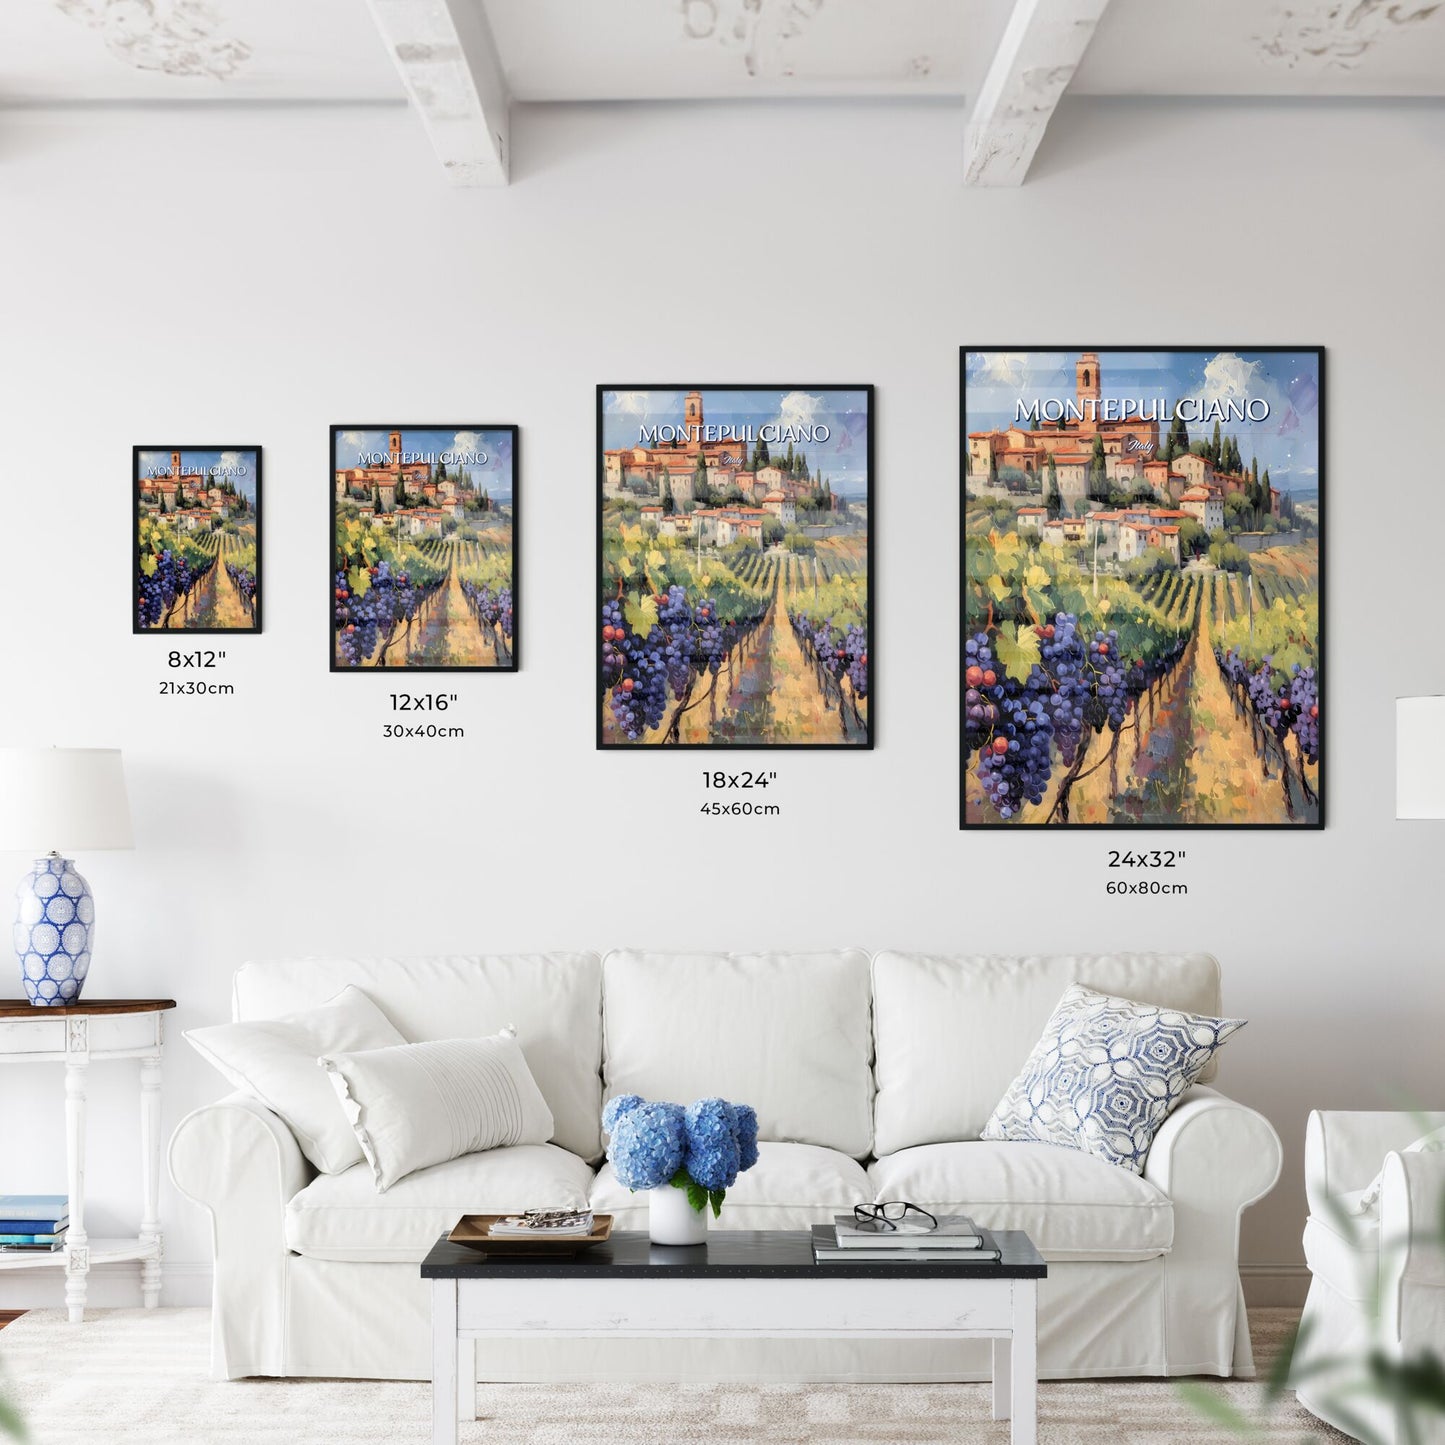 Montepulciano, Italy - Art print of a painting of a town with a vineyard and grapes Default Title